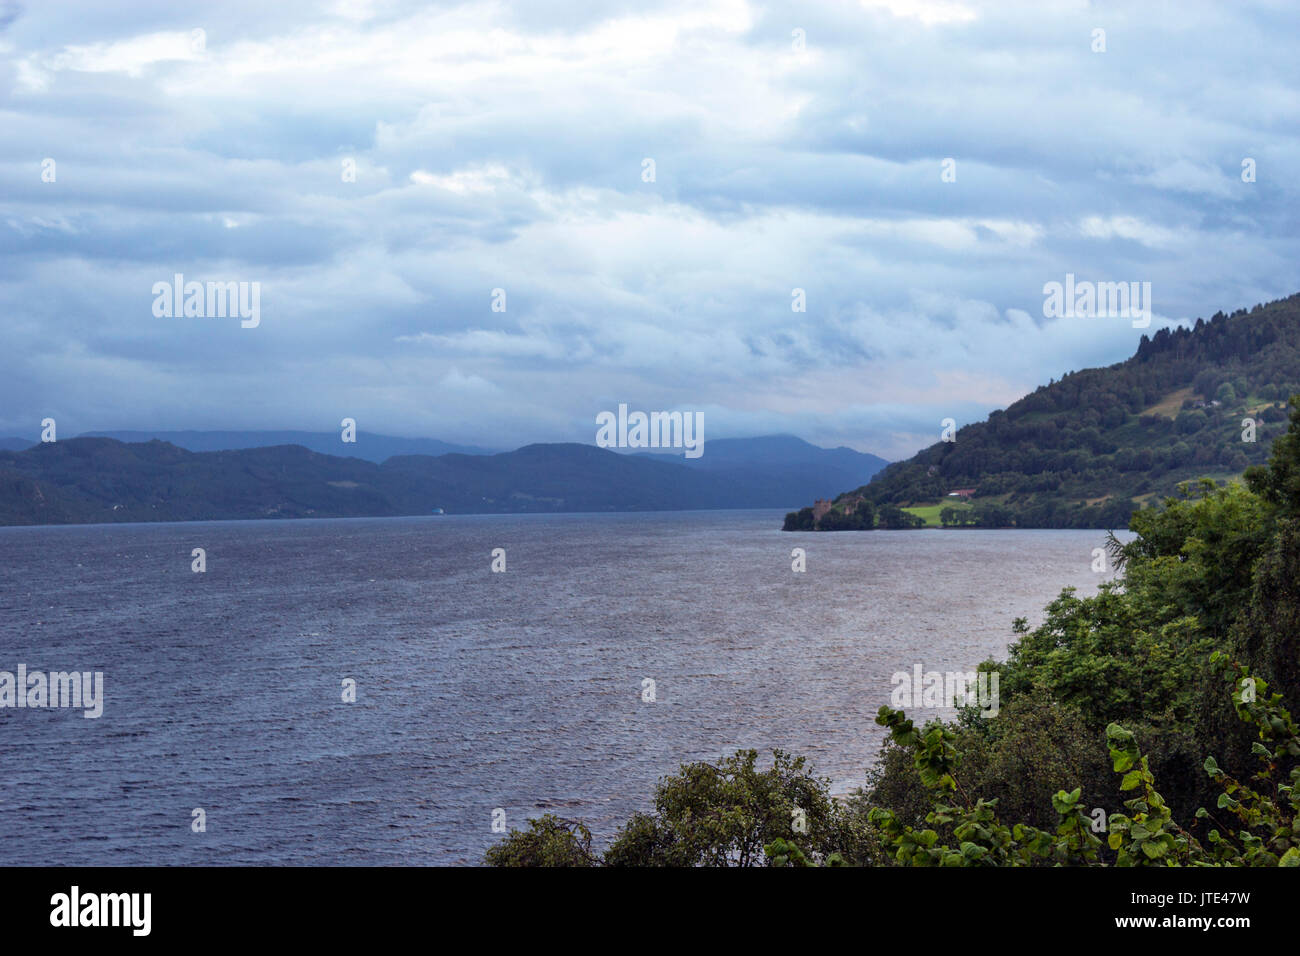 Scotland, Highlands, Scottish Scenery, Clear Waters, Sea, Mountaintop, Blue Waters, Trees, Countryside, Nature, Loch Ness, Dramatic Skyline Stock Photo